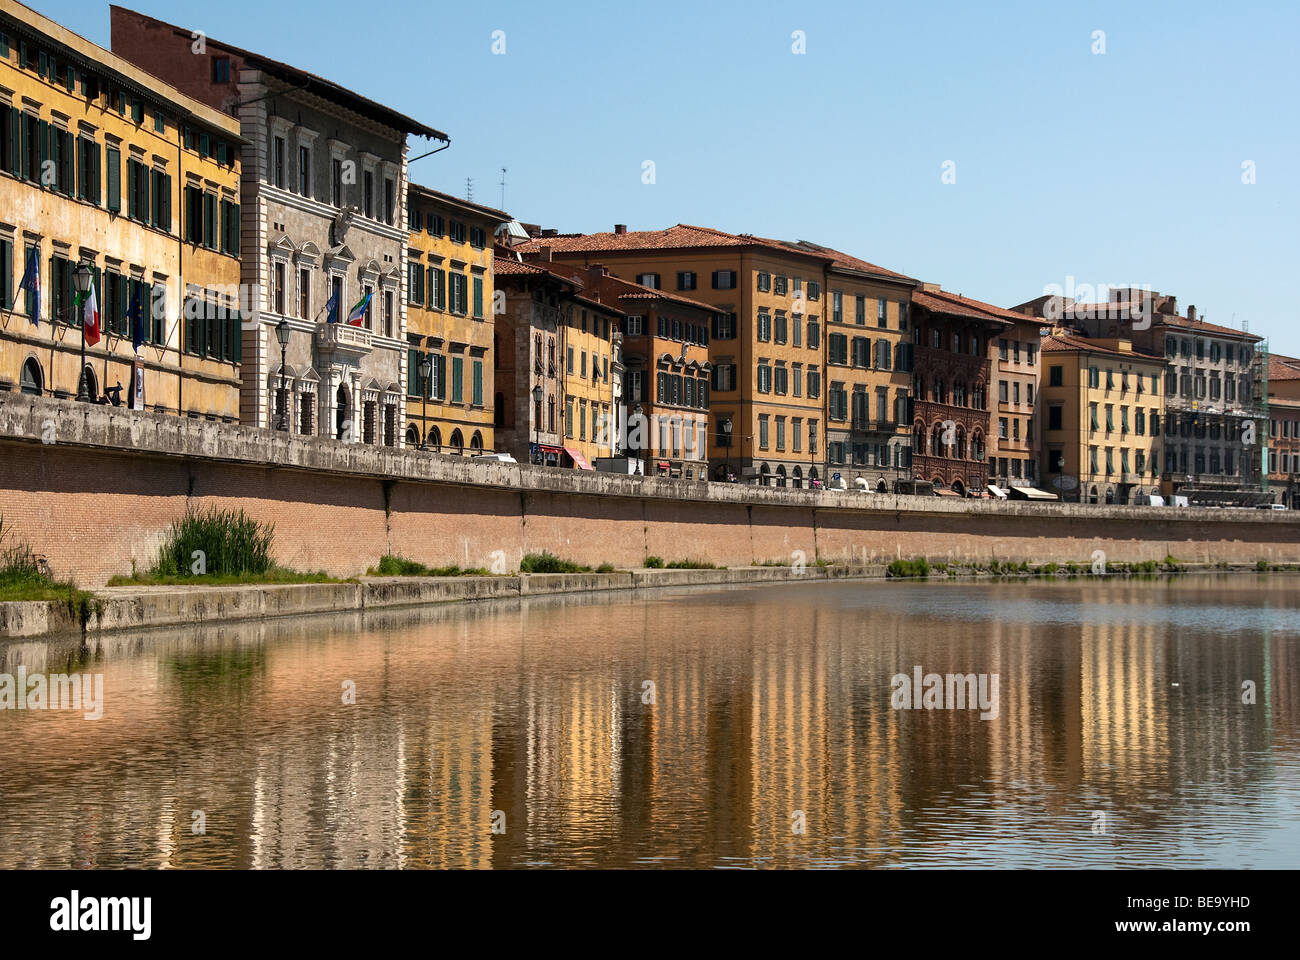 The palazzi along the nothern river front in Pisa Stock Photo